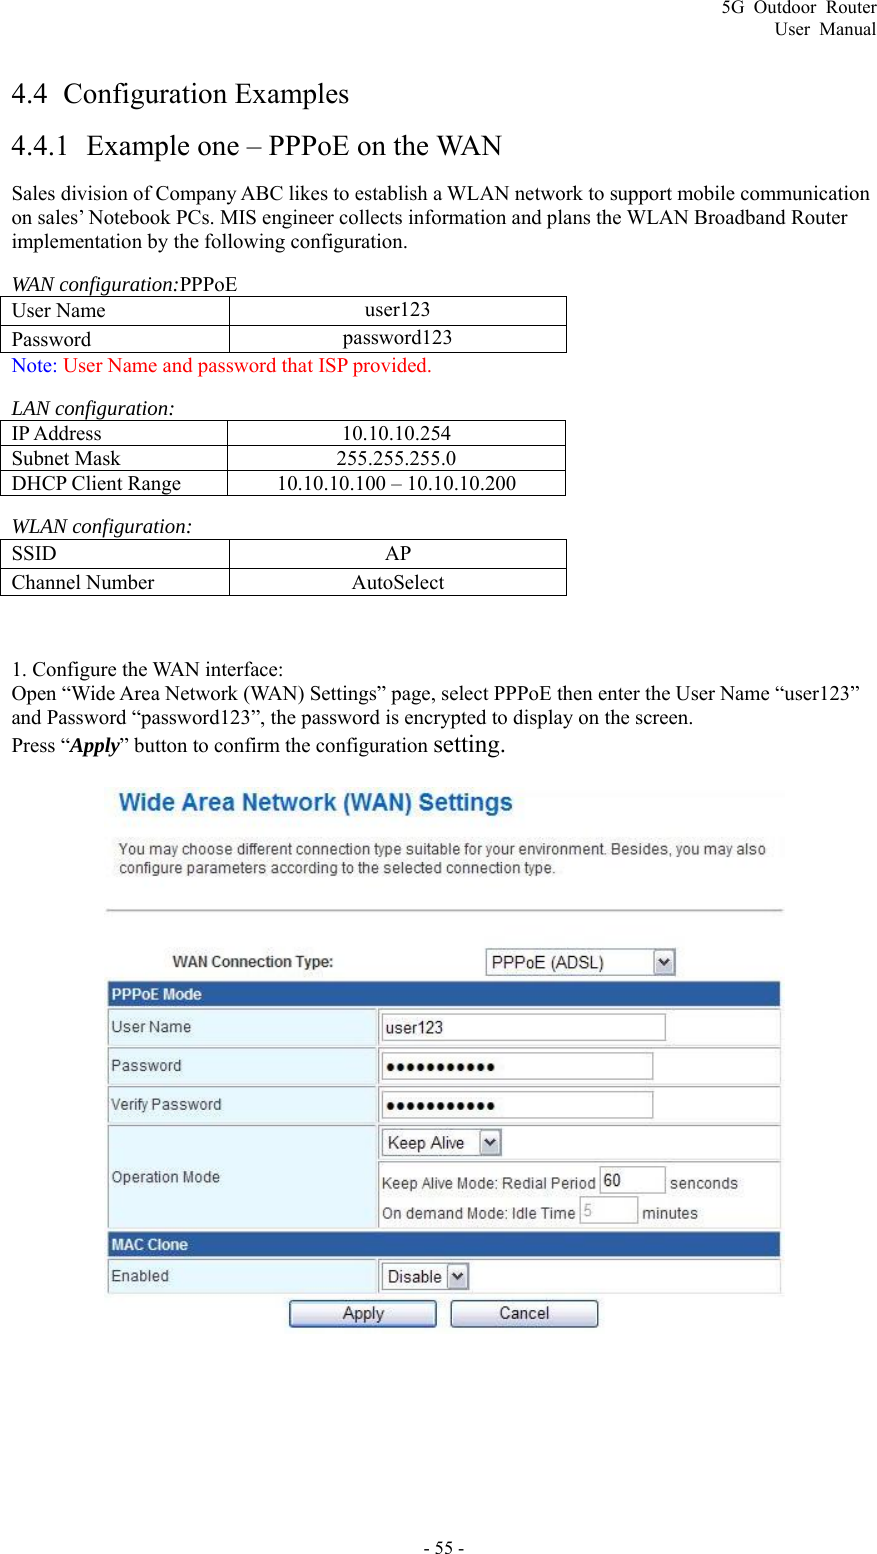 5G Outdoor Router User Manual - 55 - 4.4  Configuration Examples 4.4.1 Example one – PPPoE on the WAN Sales division of Company ABC likes to establish a WLAN network to support mobile communication on sales’ Notebook PCs. MIS engineer collects information and plans the WLAN Broadband Router implementation by the following configuration. WAN configuration:PPPoE User Name    user123 Password   password123 Note: User Name and password that ISP provided. LAN configuration: IP Address 10.10.10.254 Subnet Mask 255.255.255.0 DHCP Client Range 10.10.10.100 – 10.10.10.200 WLAN configuration: SSID   AP Channel Number    AutoSelect  1. Configure the WAN interface:   Open “Wide Area Network (WAN) Settings” page, select PPPoE then enter the User Name “user123” and Password “password123”, the password is encrypted to display on the screen. Press “Apply” button to confirm the configuration setting.   